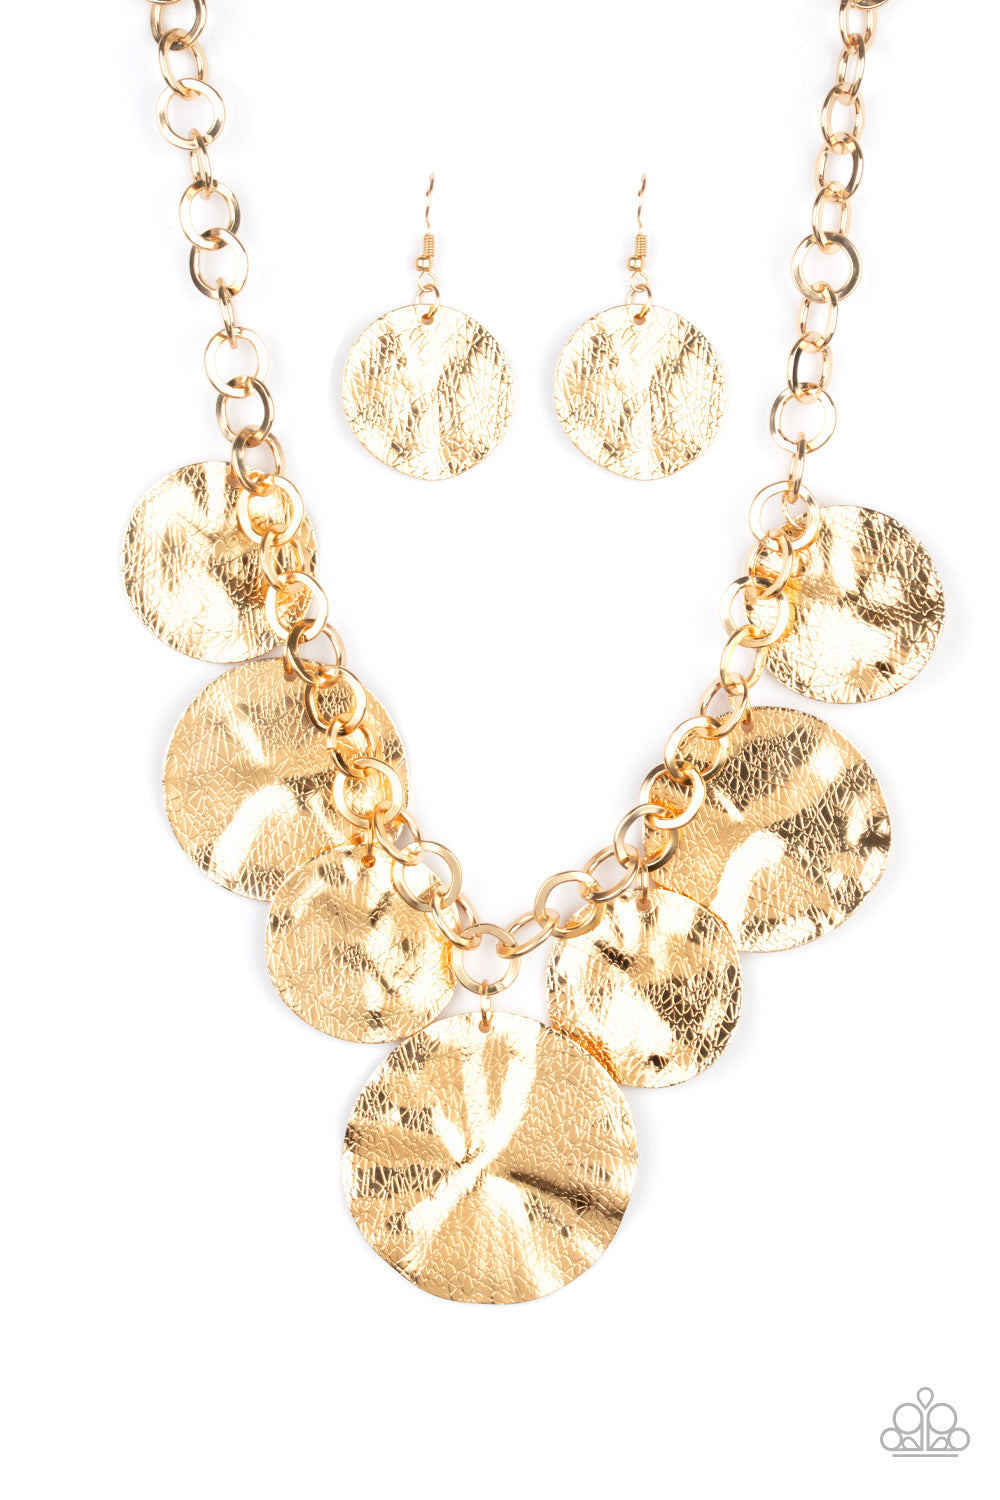 Barely Scratched The Surface Gold Paparazzi Necklace Cashmere Pink Jewels